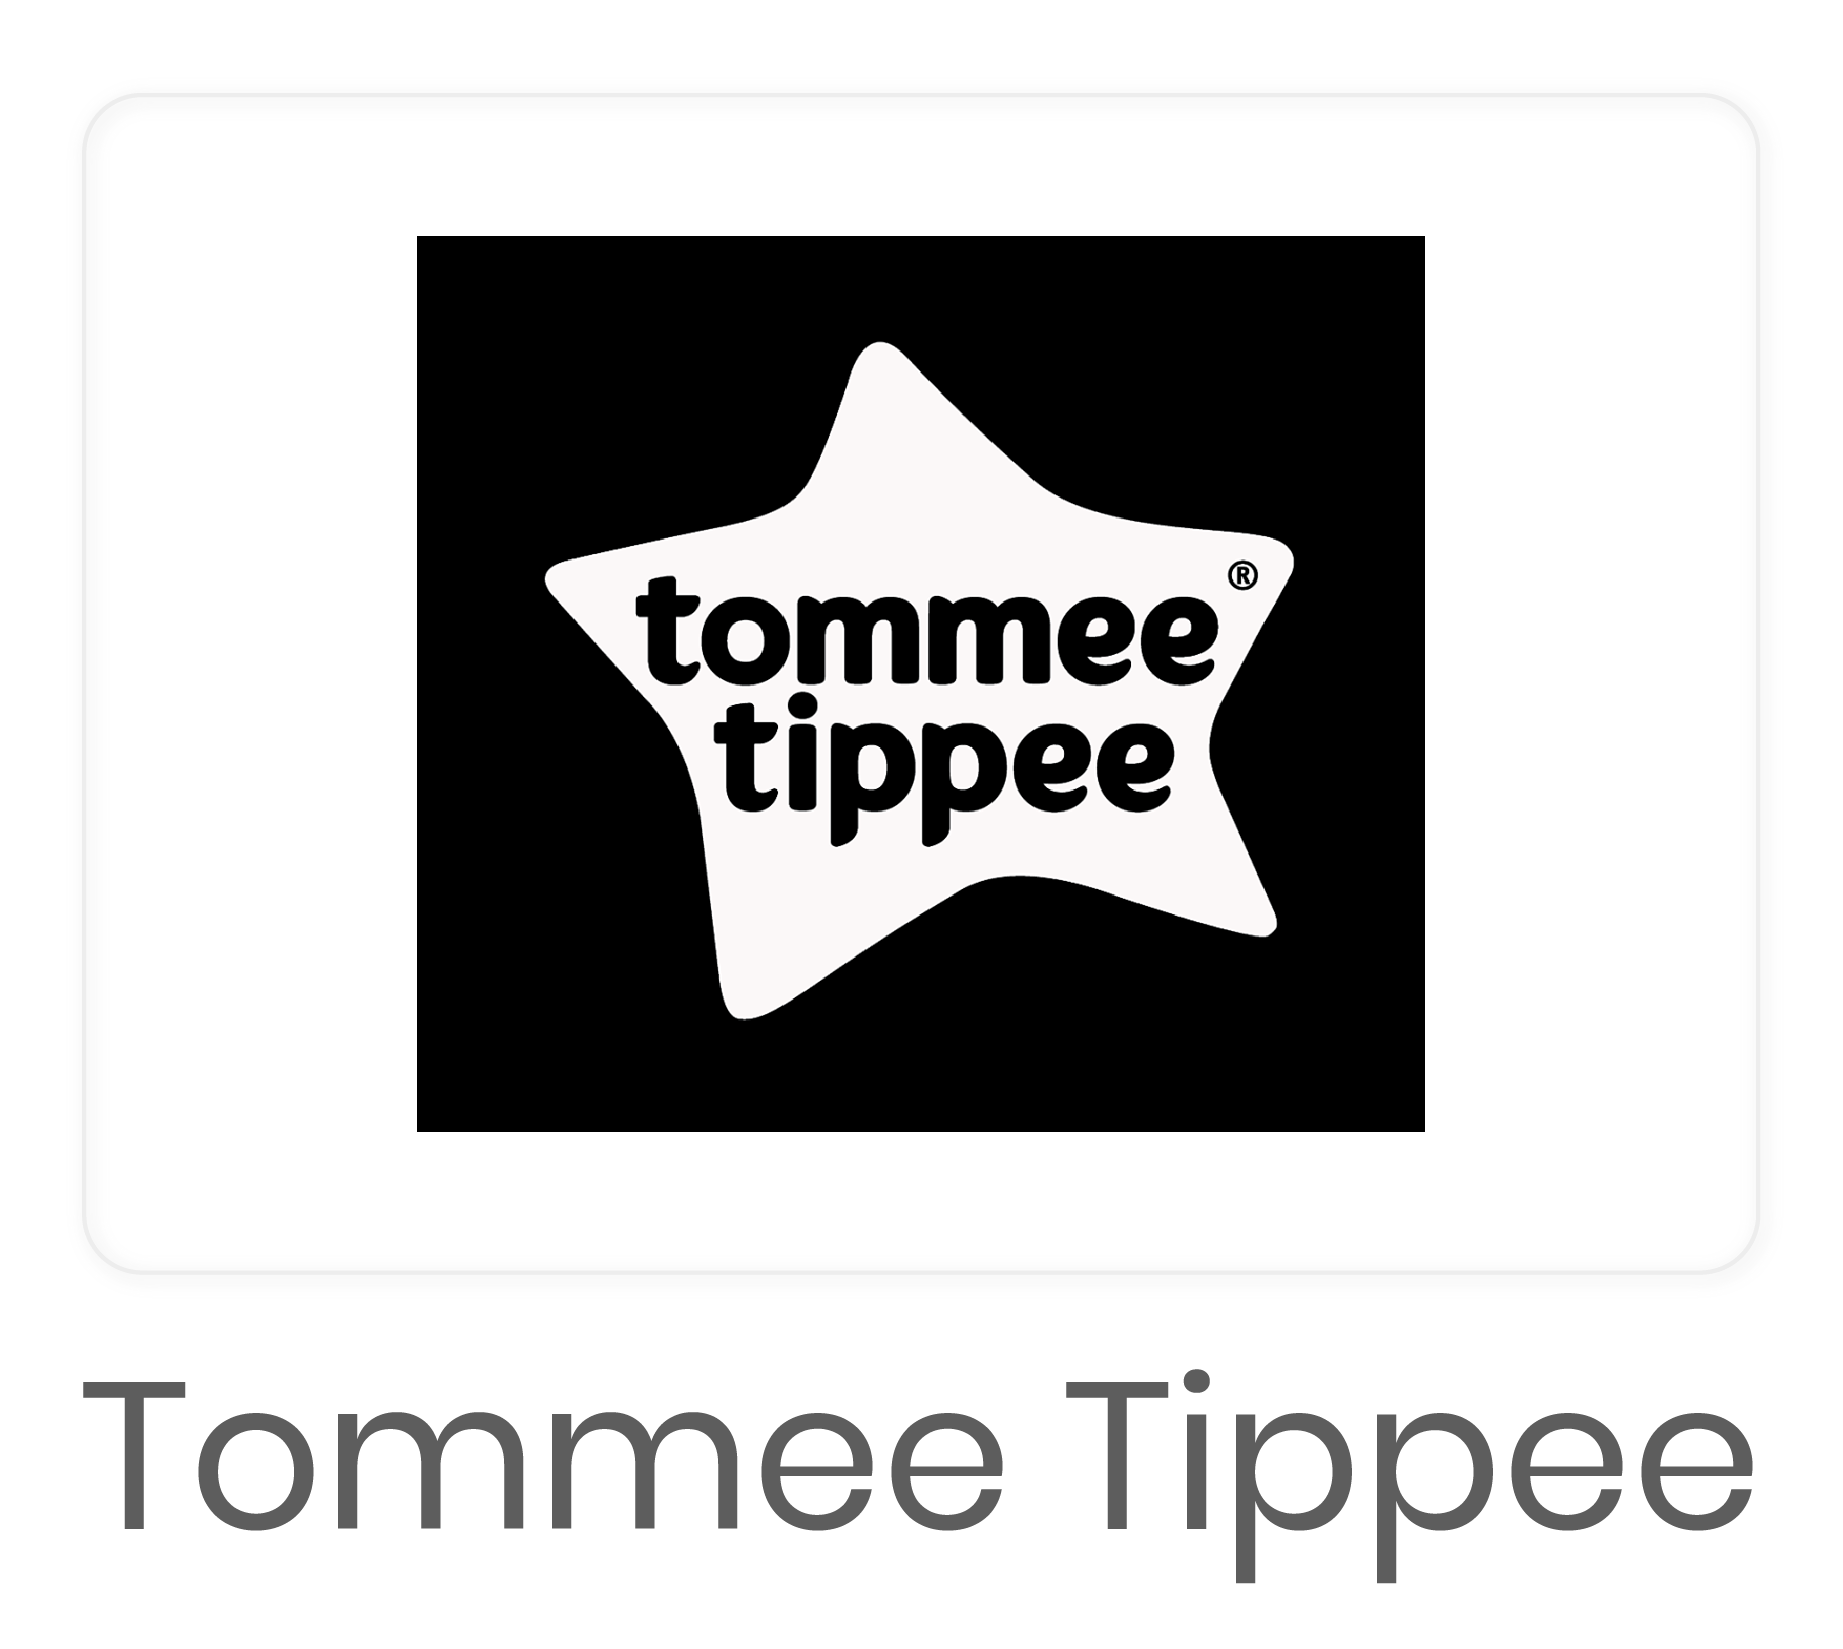 Tommee+Tippee-79.png